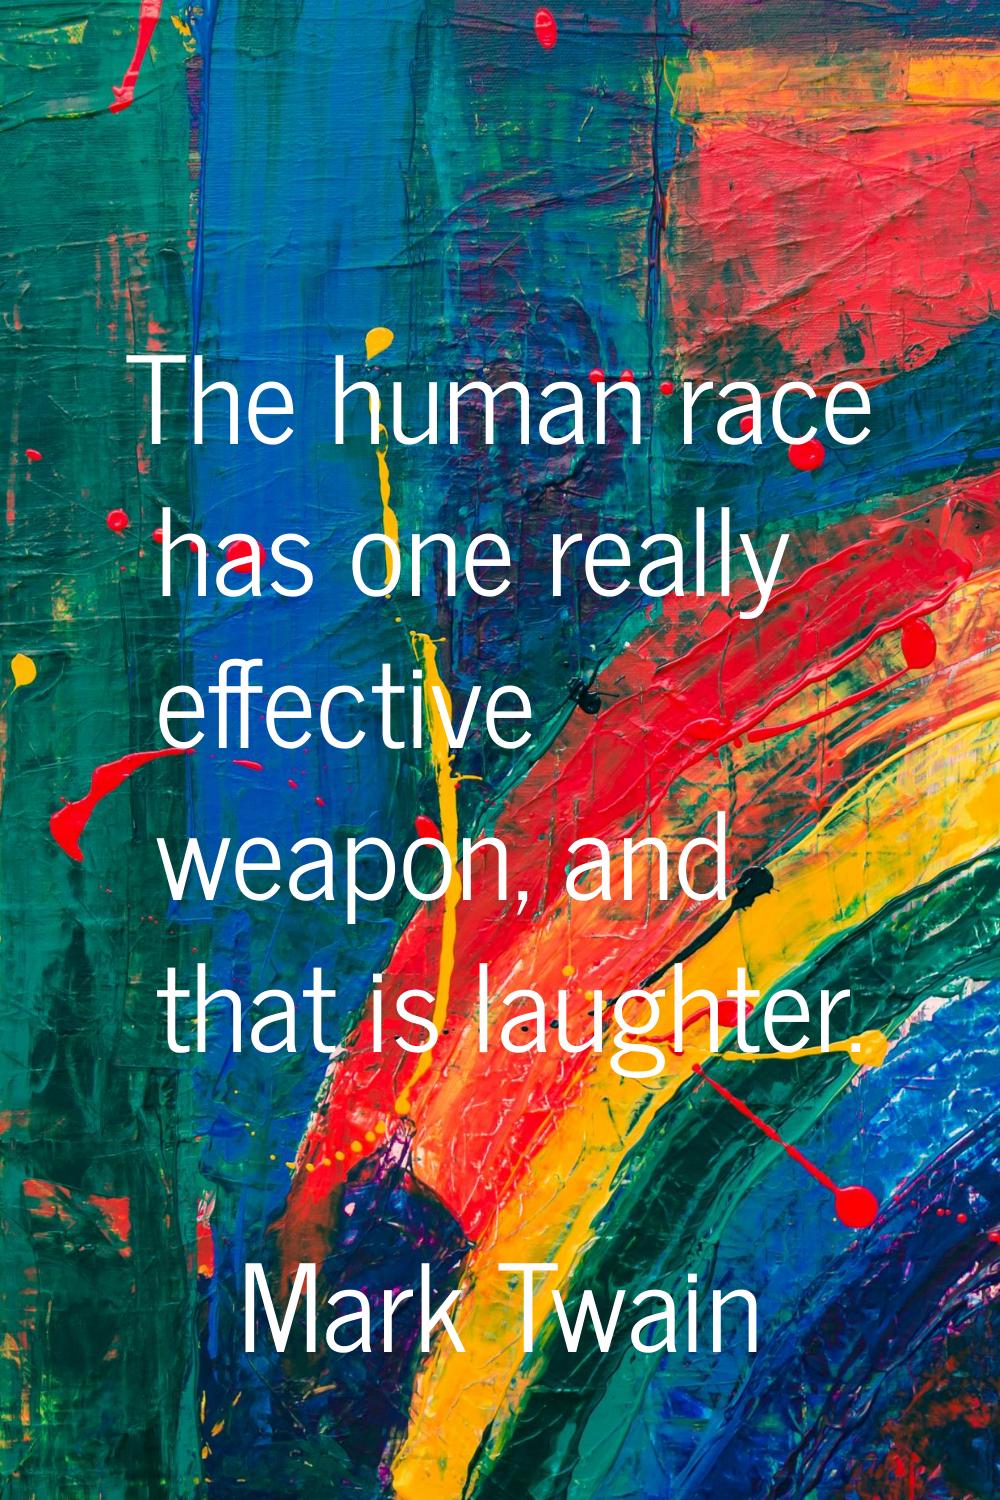 The human race has one really effective weapon, and that is laughter.